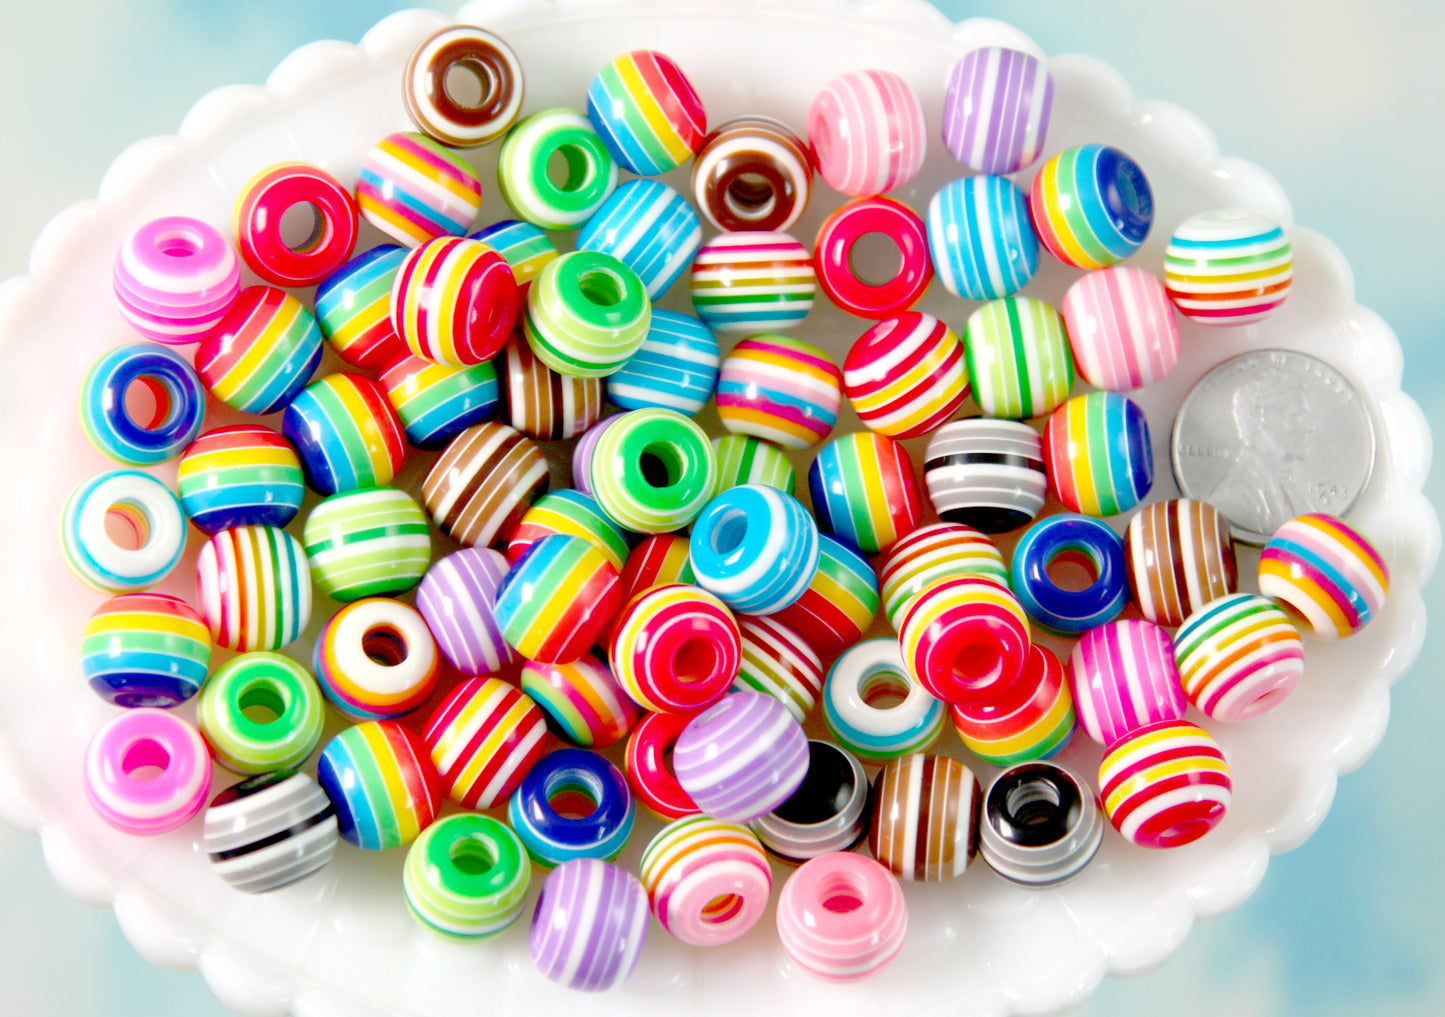 Large Hole Resin Beads - 12mm Striped Resin Beads with Large Holes, mixed color, medium size beads - 60 pc set